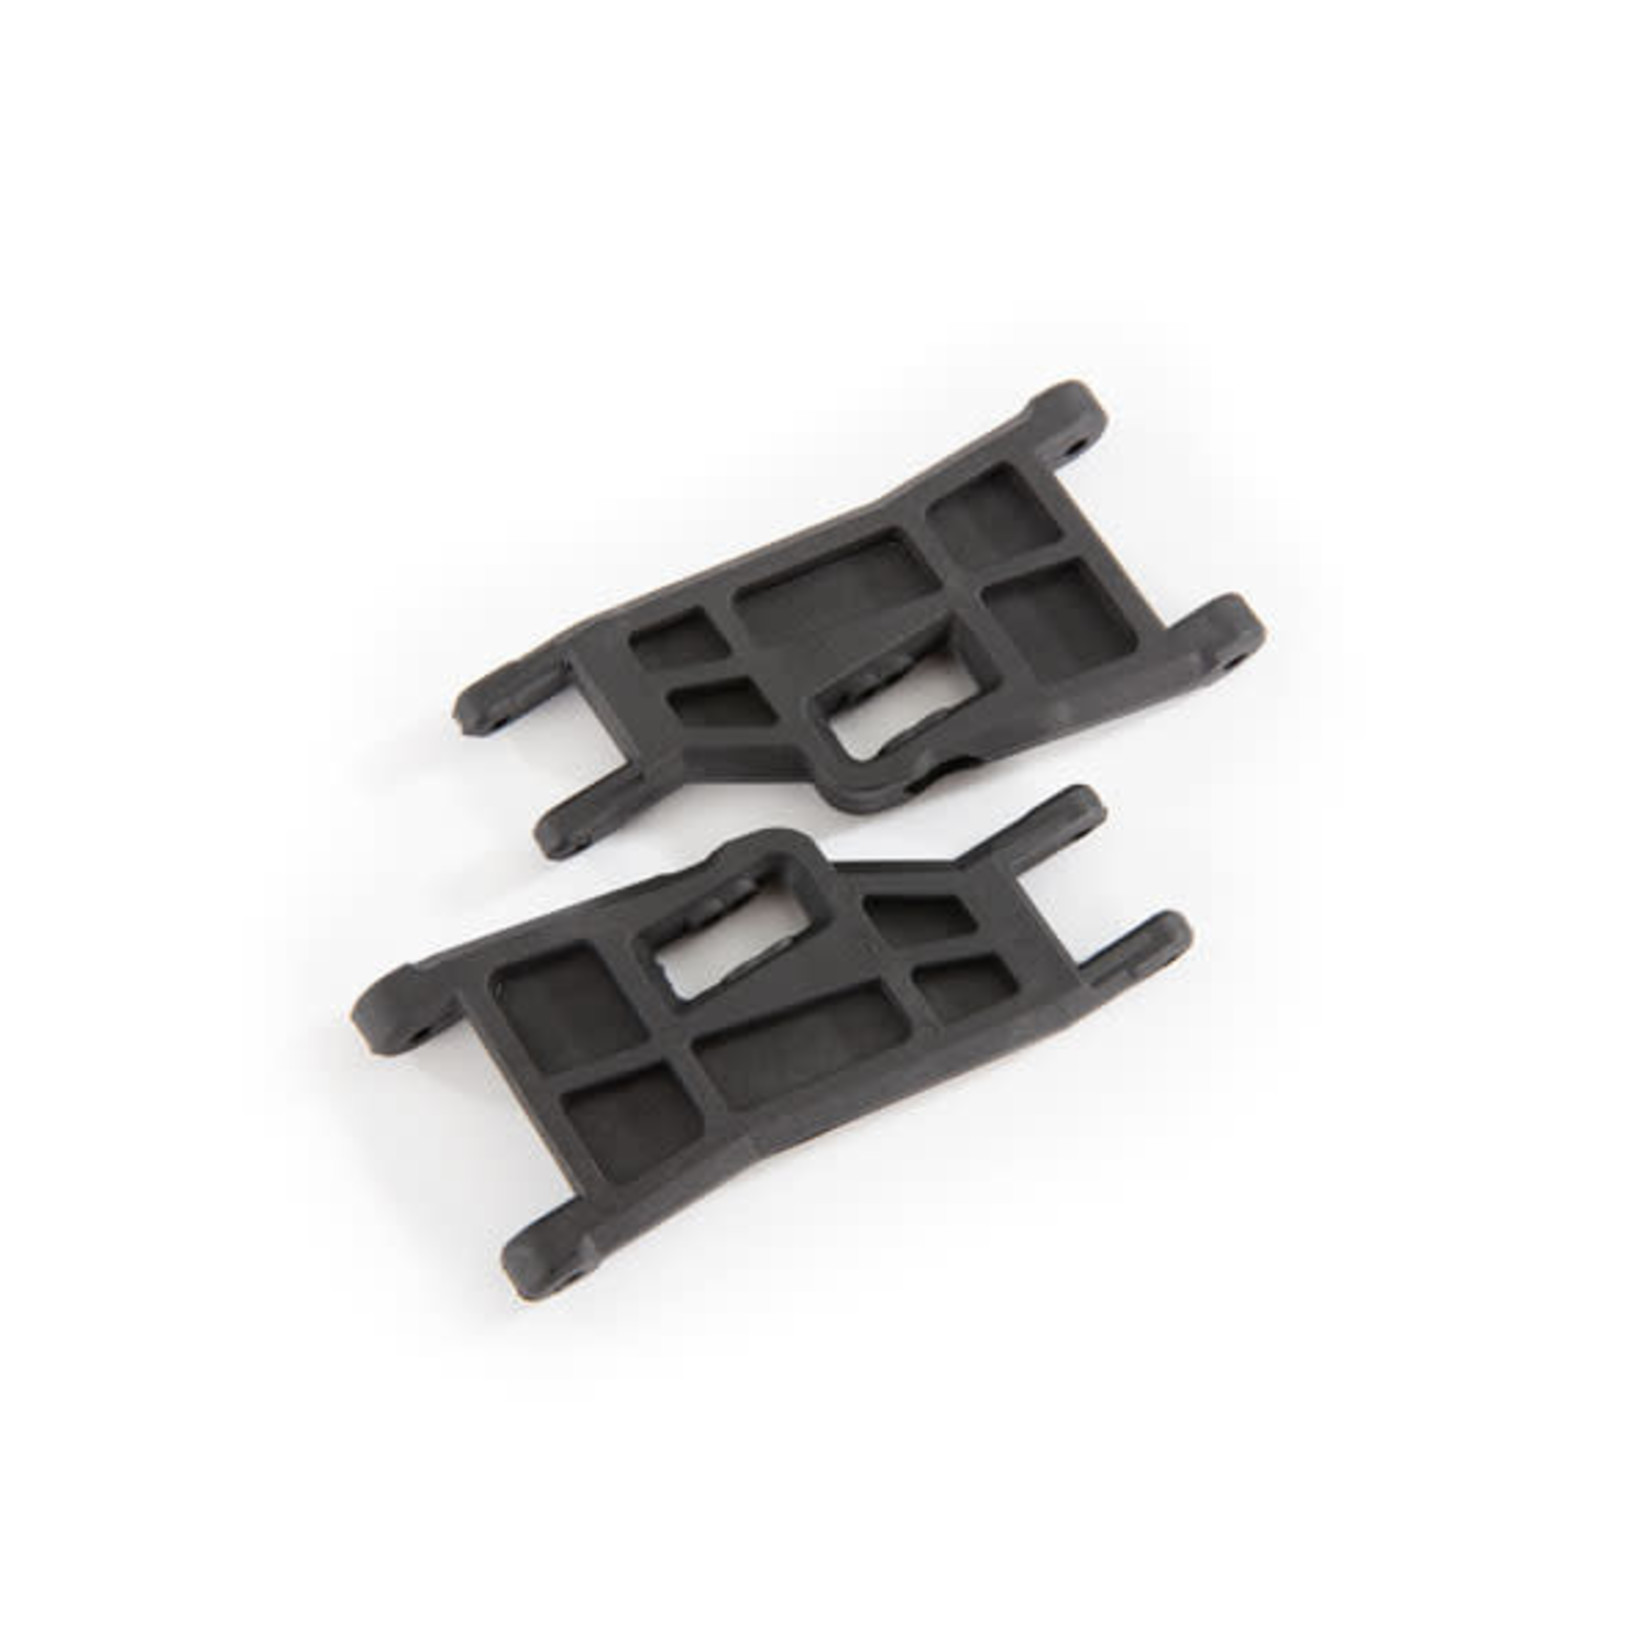 Traxxas 3631 Suspension arms (front) (2)